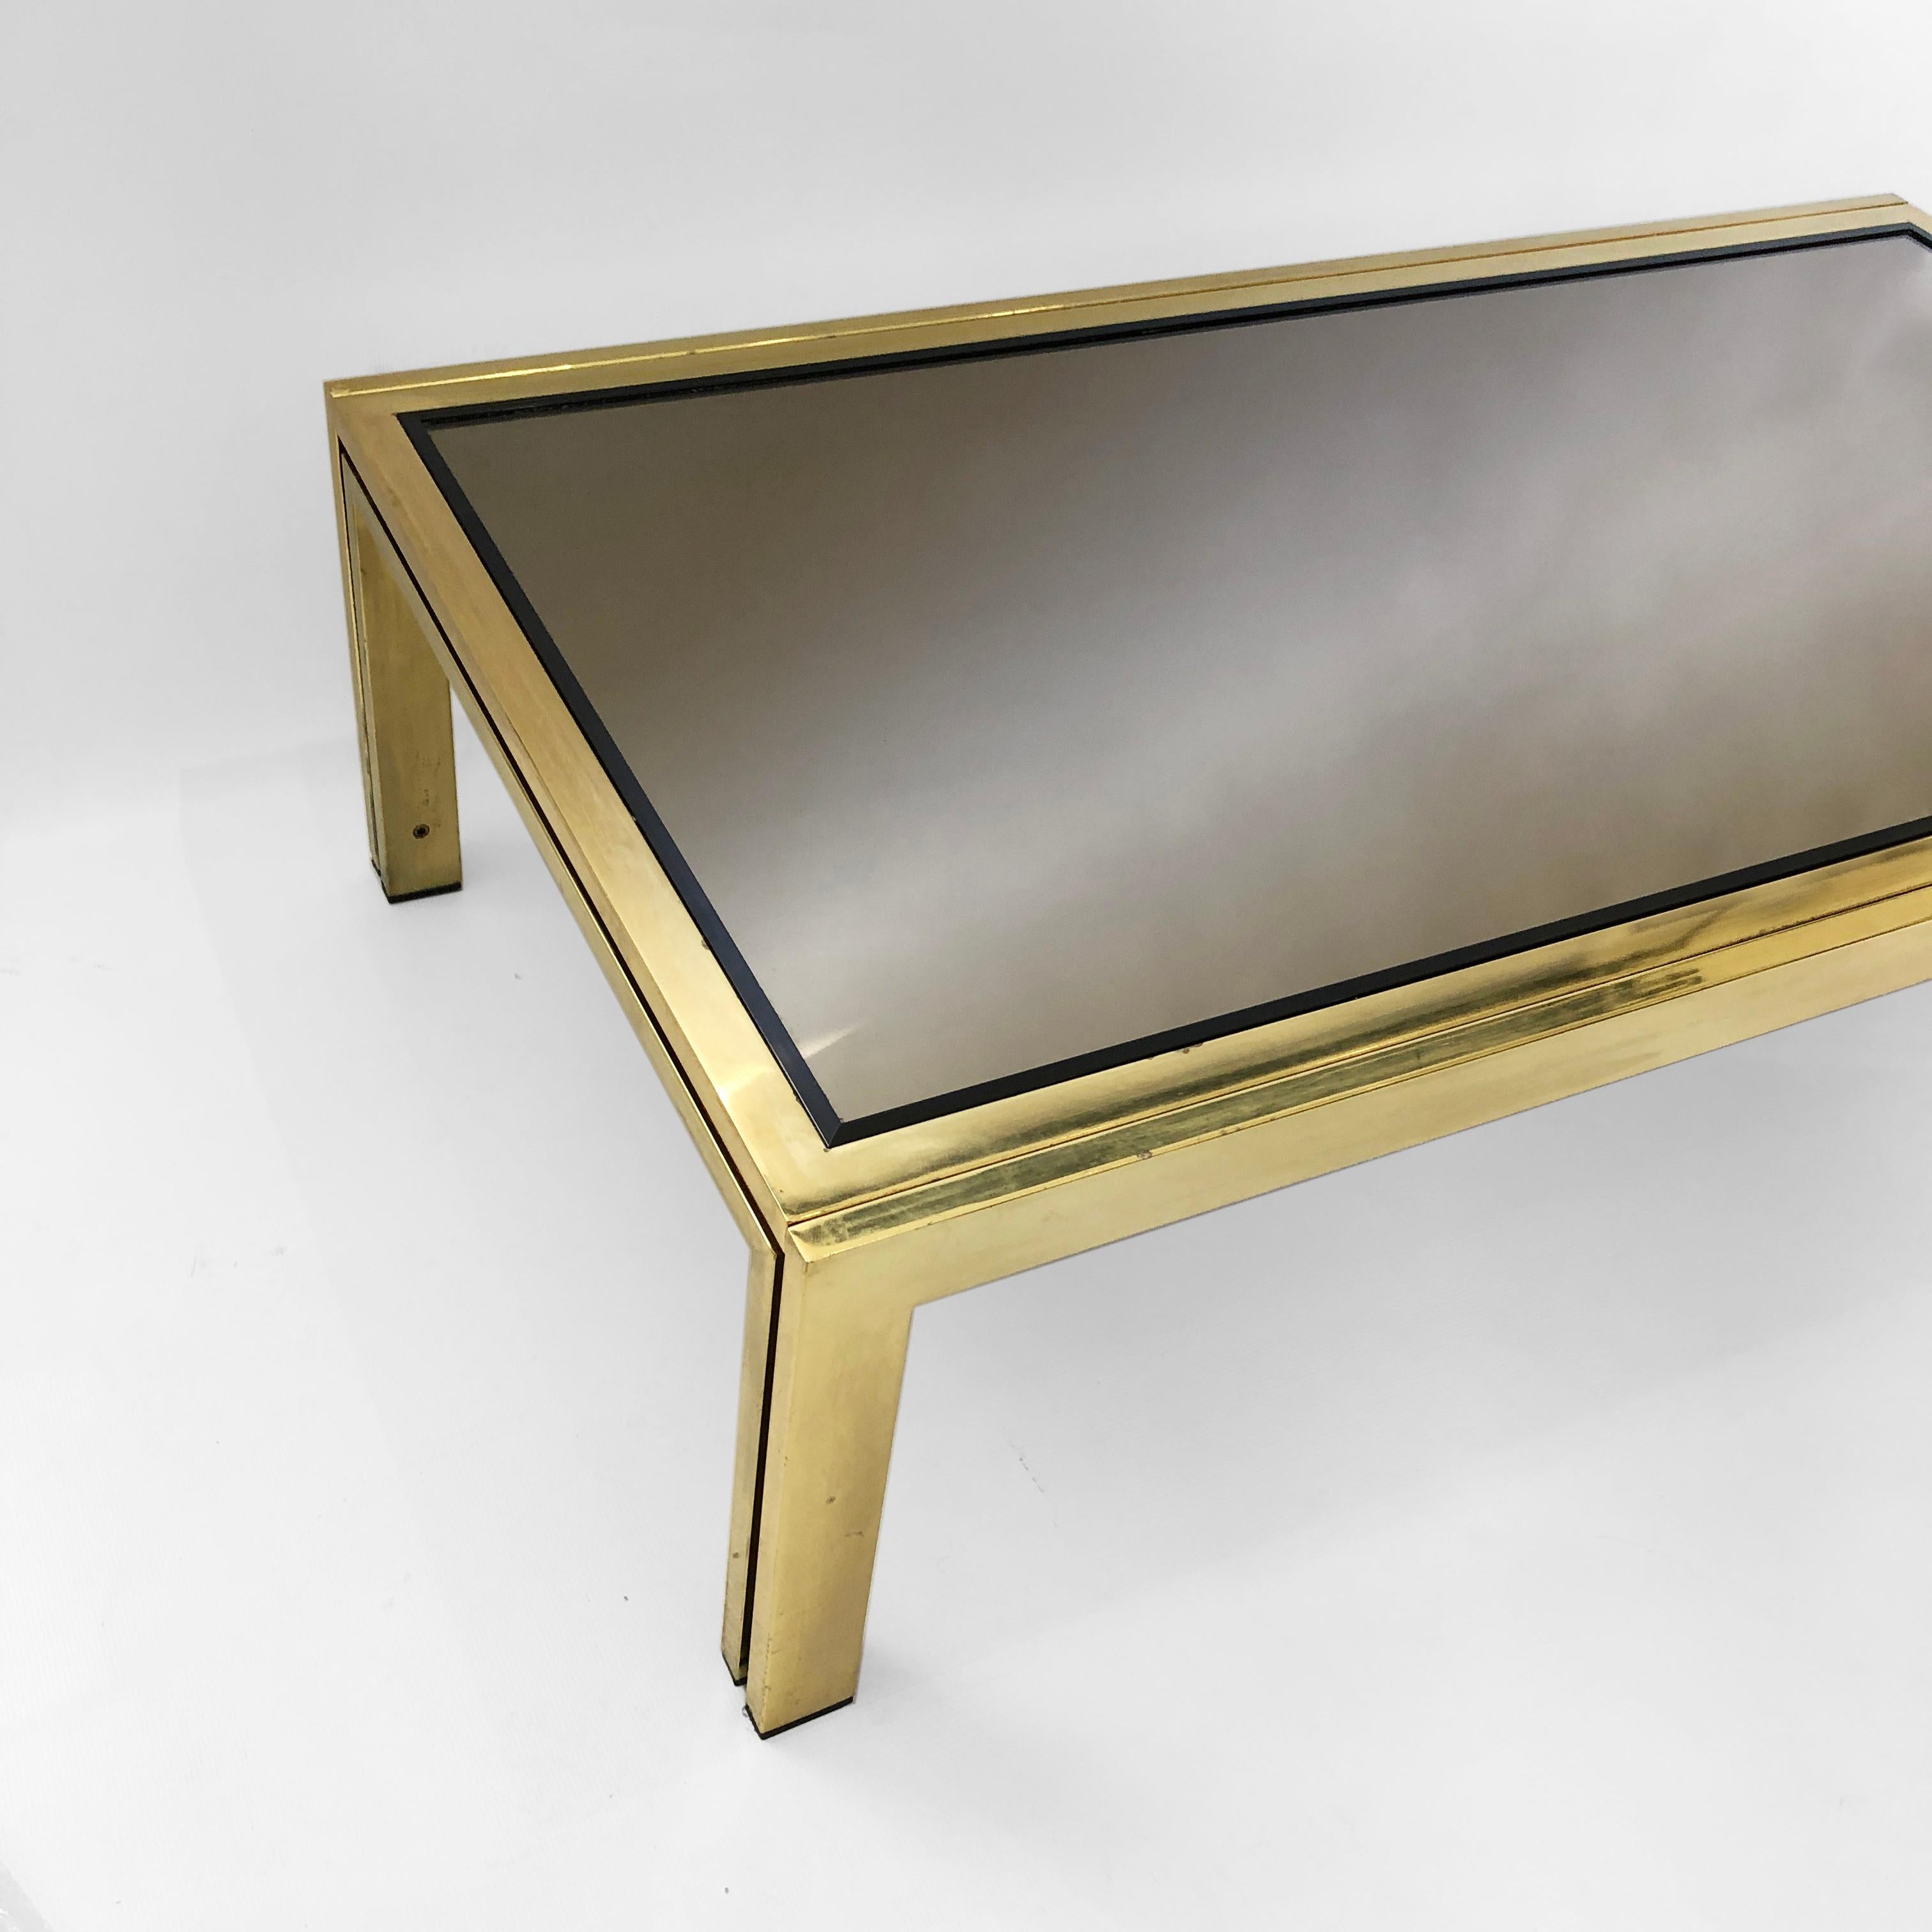 Brass Smoked Mirror Rectangular Coffee Table 1970s Hollywood Regency Renato Zevi In Good Condition For Sale In London, GB